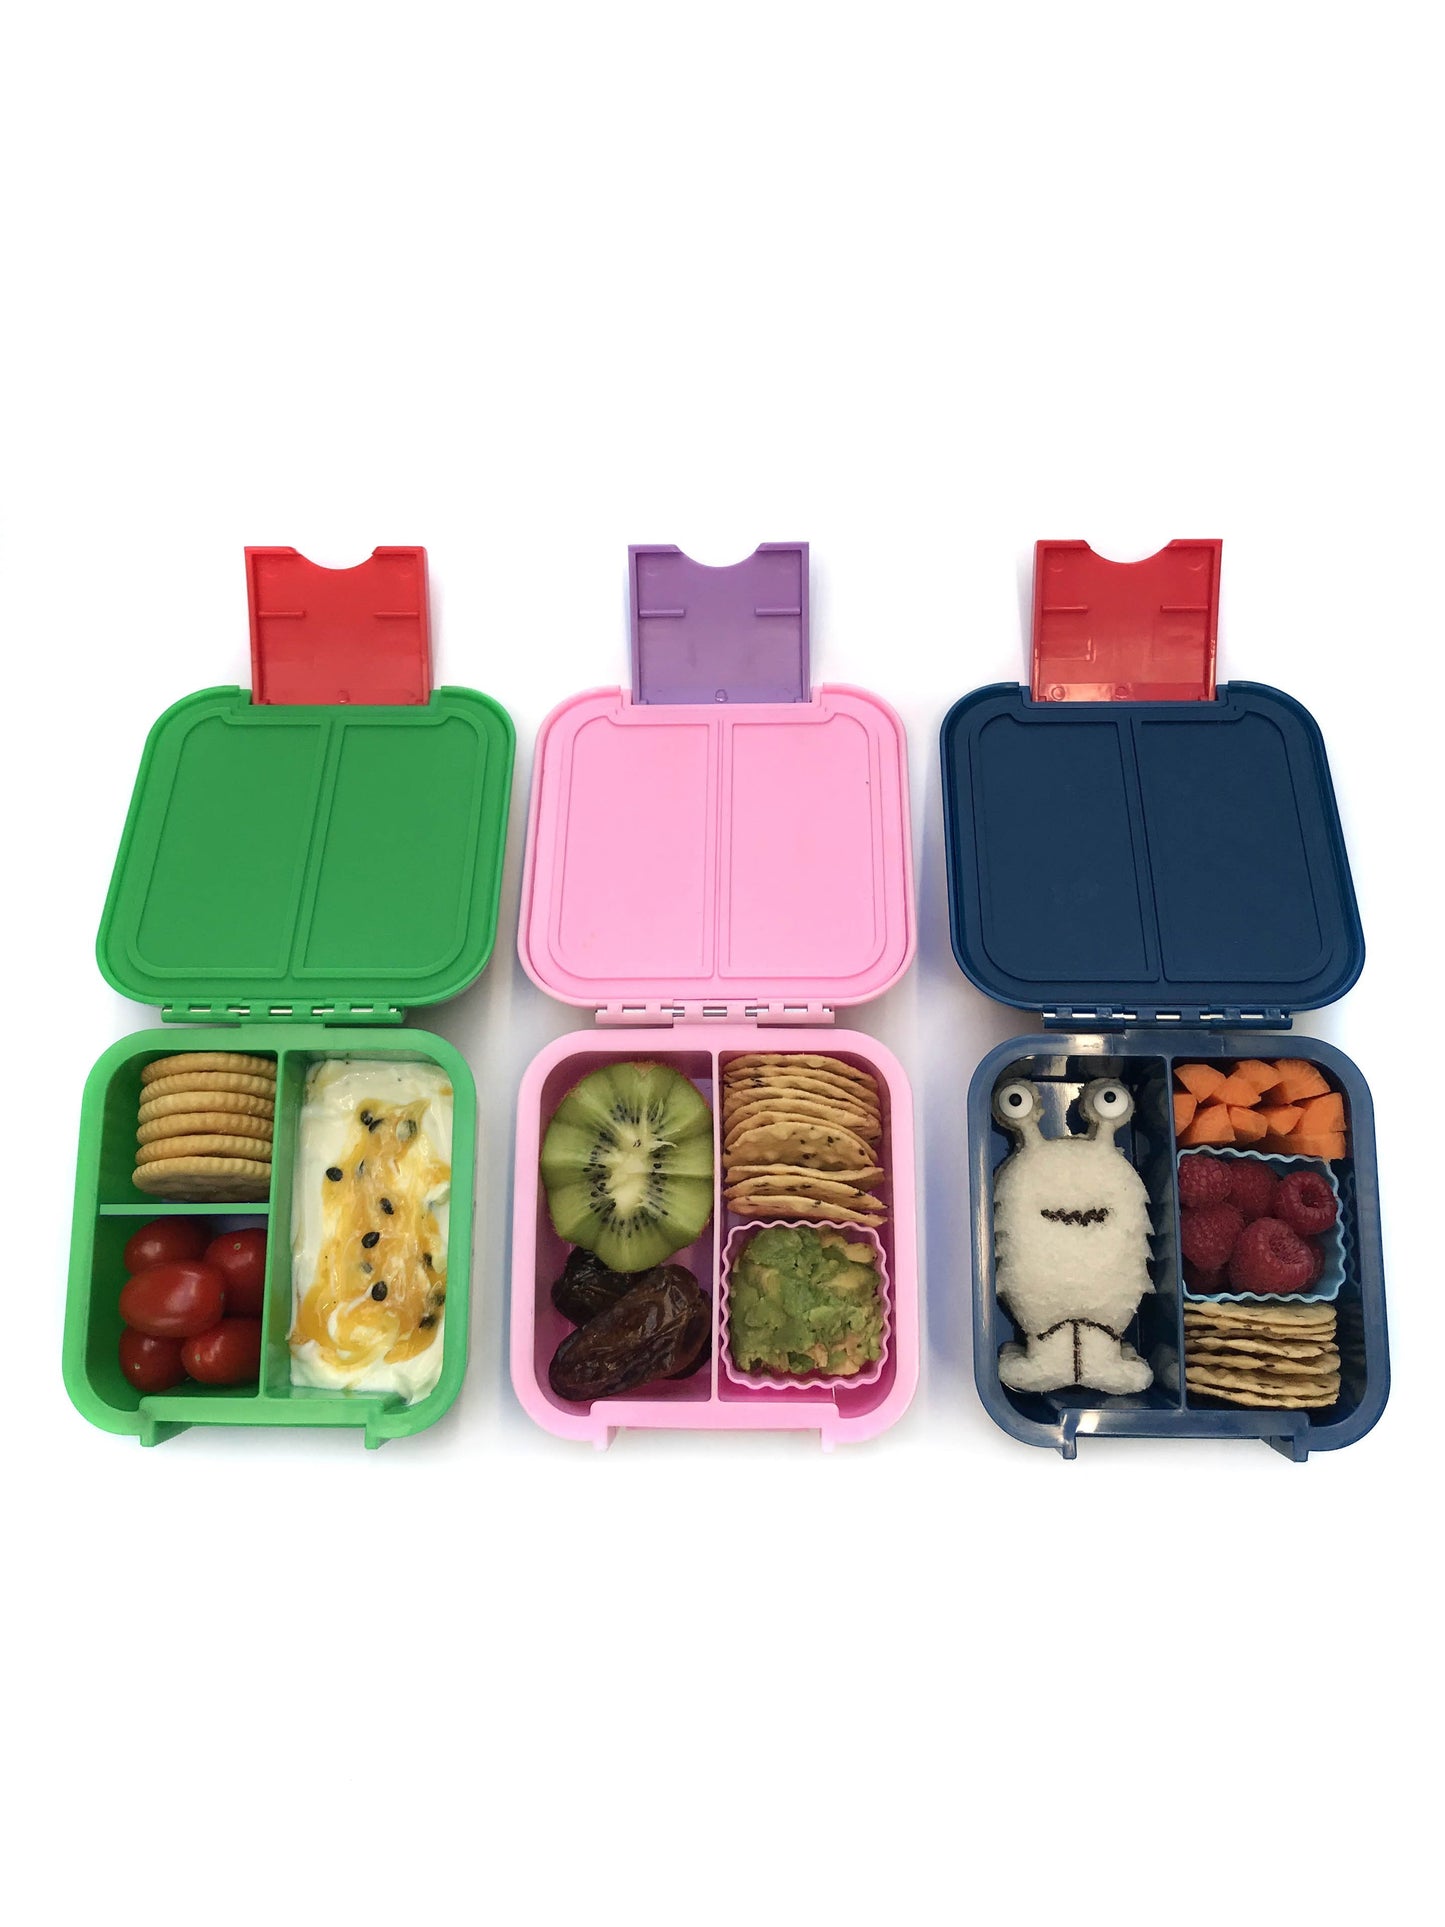 Little Lunch Box Co - Bento Two - Mermaid